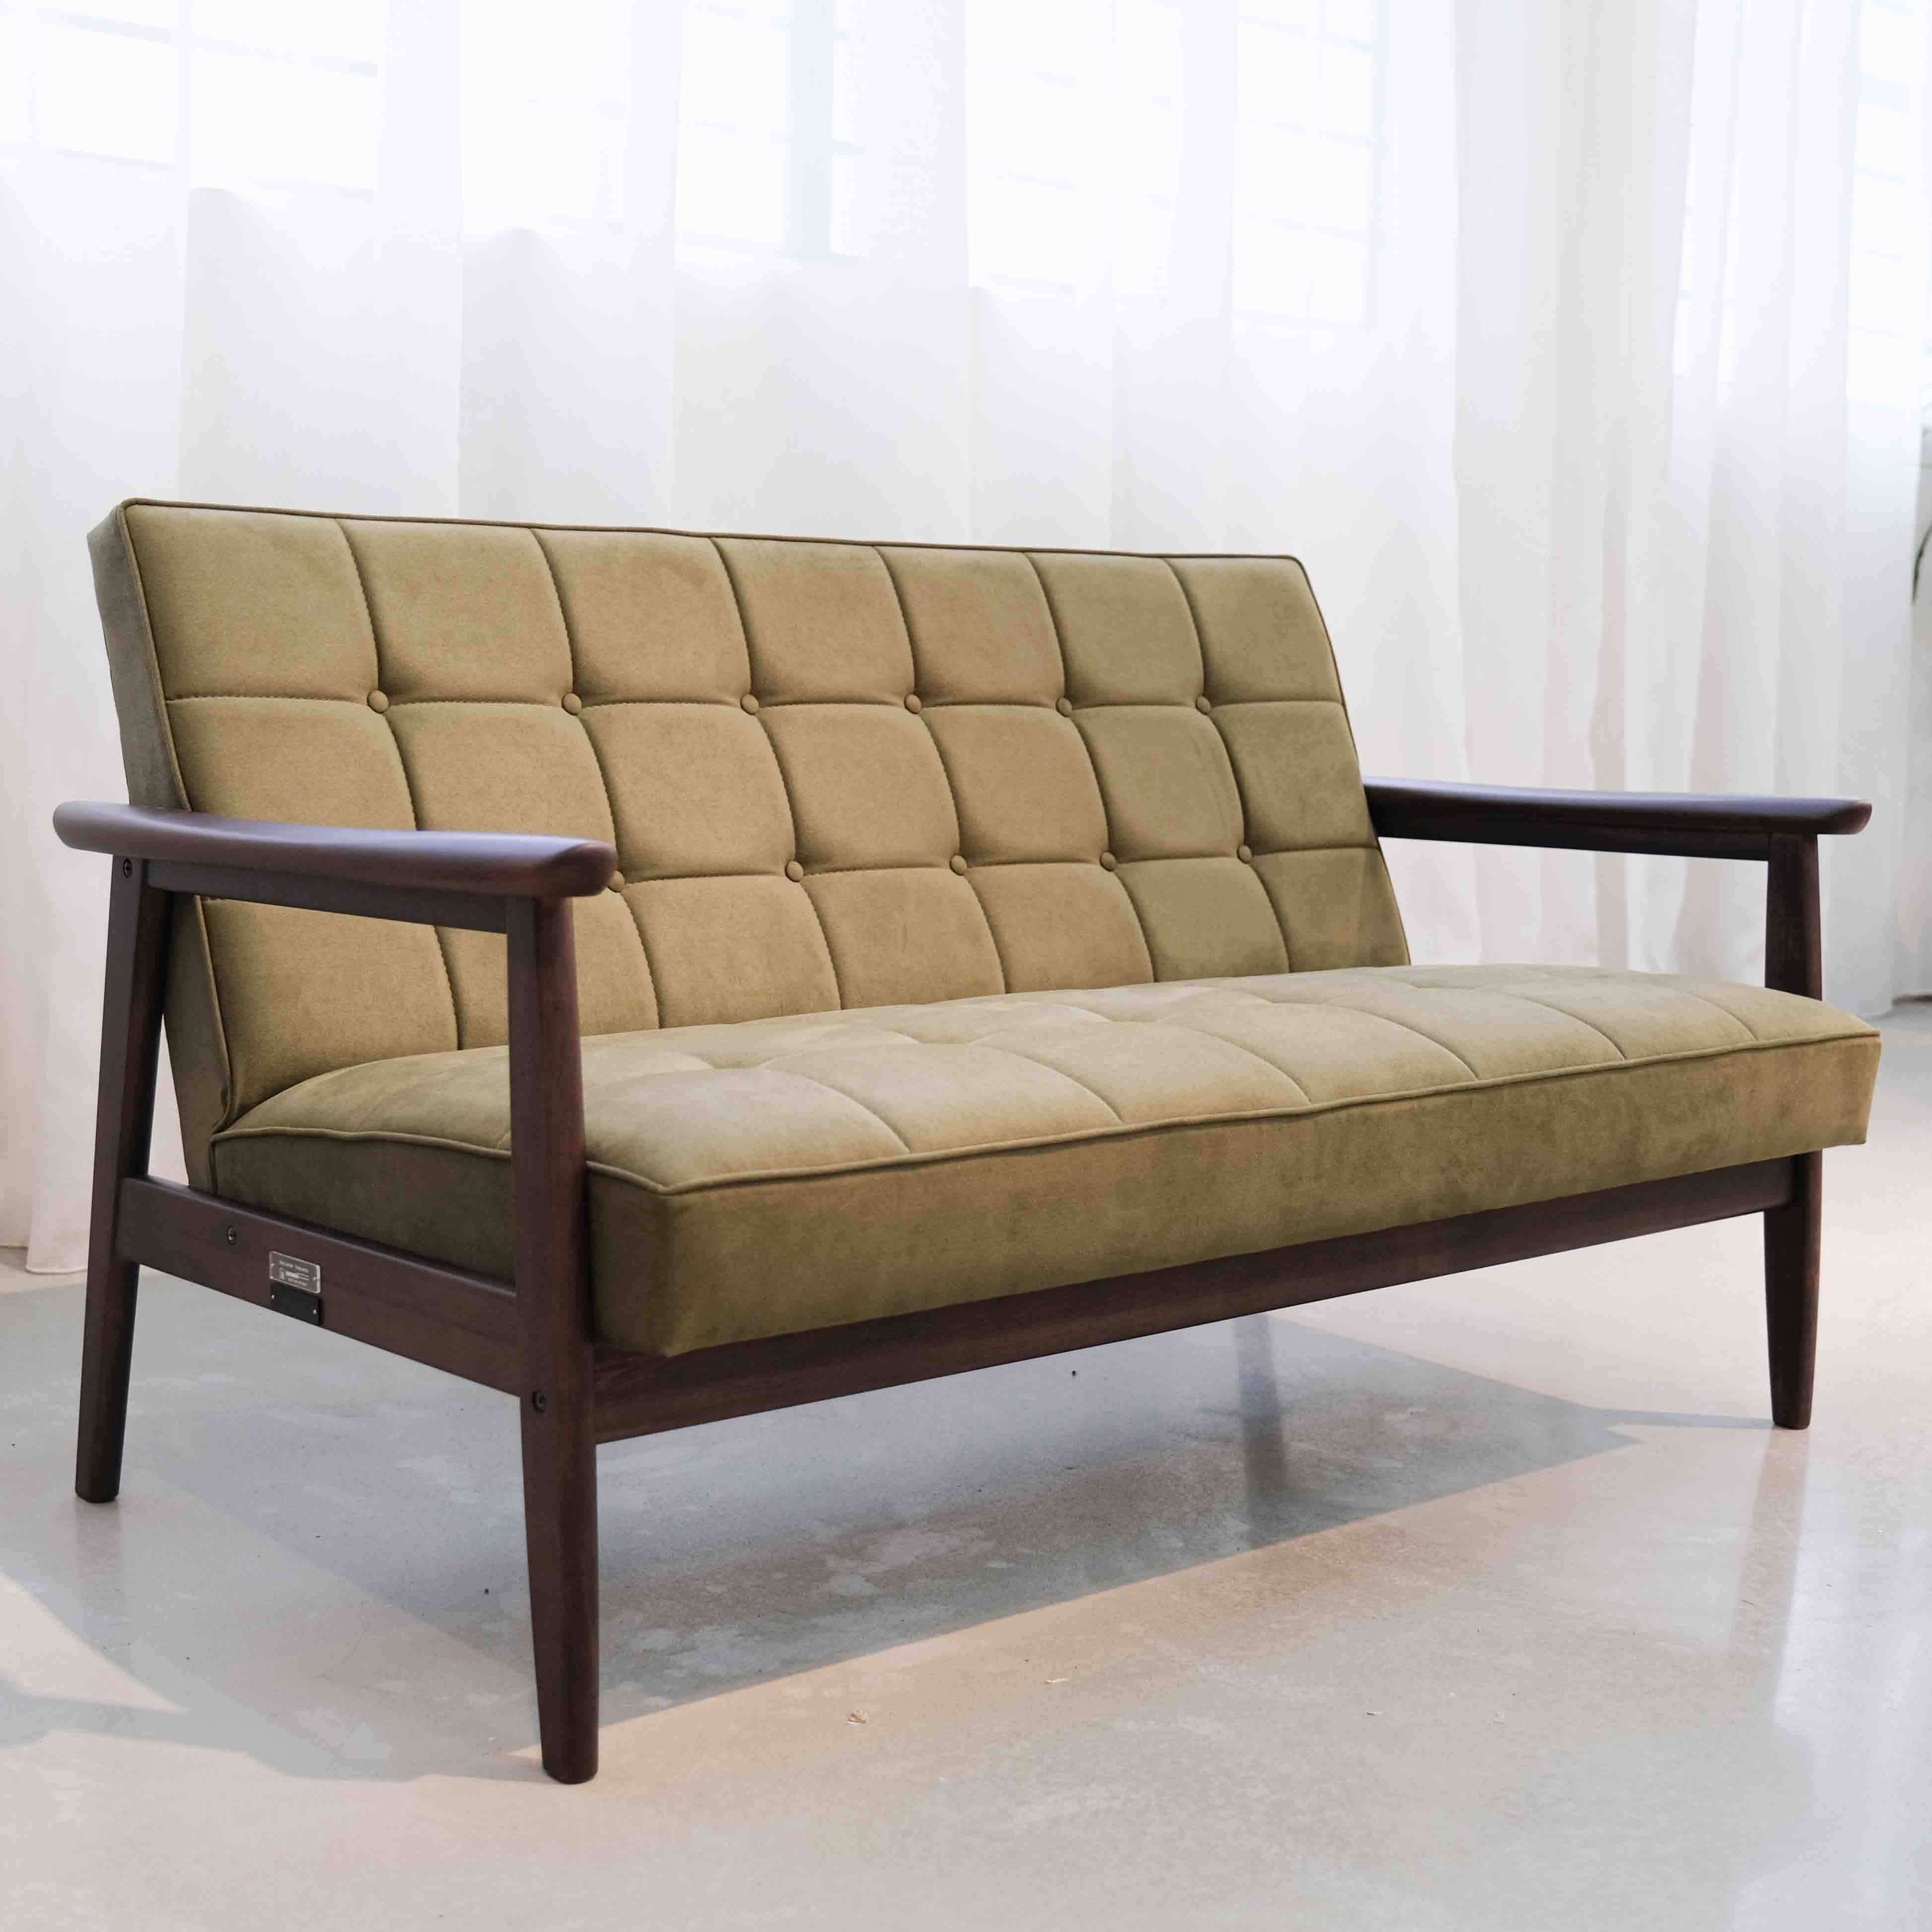 Karimoku60 - OUT OF STOCK 15th Anniversary K Chair Two Seater Special Edition - Sofa 